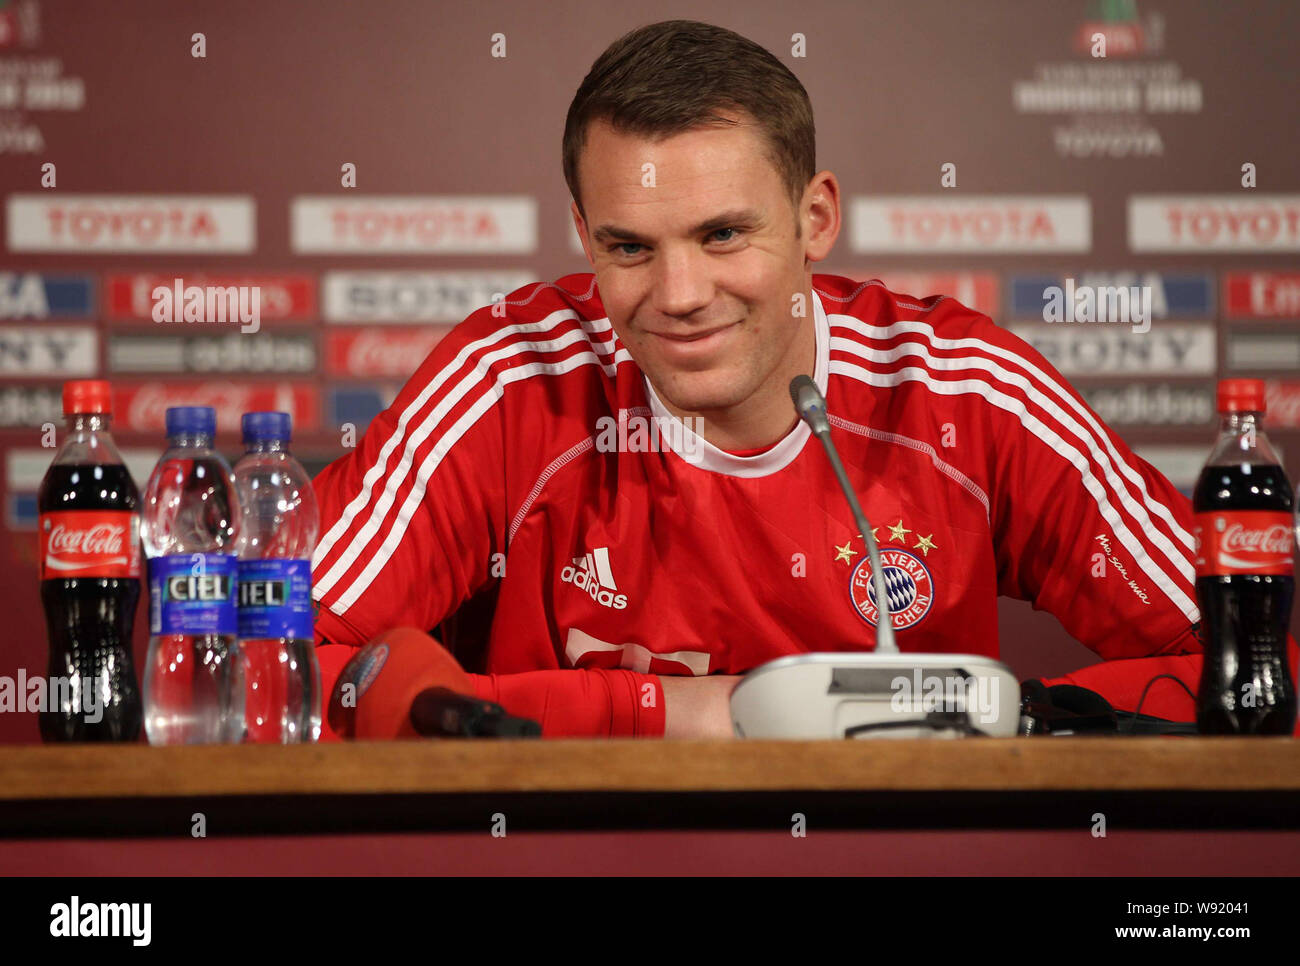 Goalkeeper Manuel Neuer of Germanys Bayern Munich smiles at a press conference during the 2013 FIFA Club World Cup in Agadir, Morocco, 15 December 201 Stock Photo